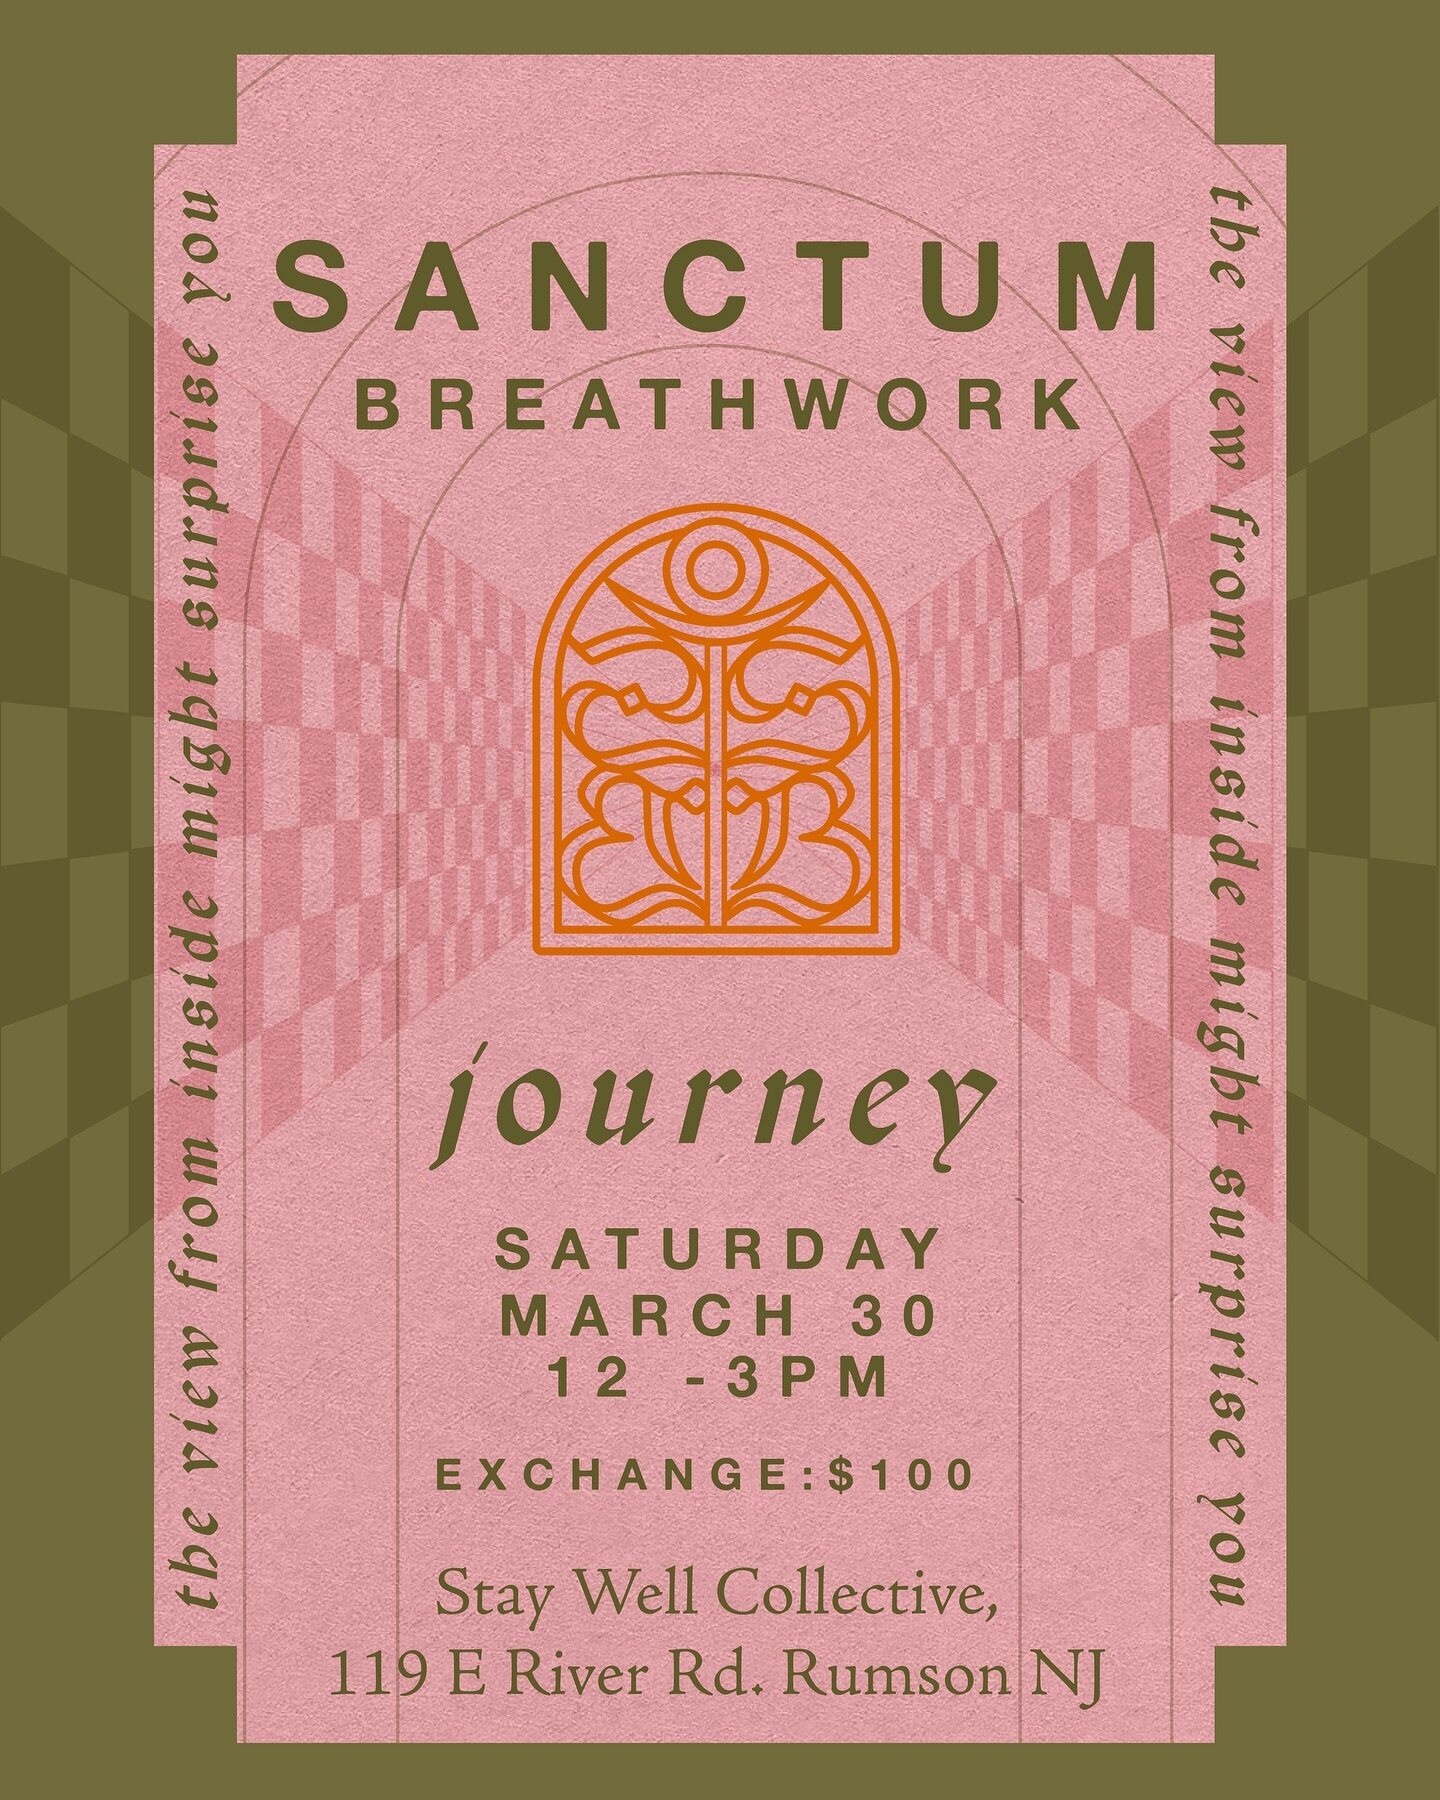 ✨Sanctum Breathwork Journey✨

Stay Well Collective in Rumson on March 30th at 12pm. This intimate session is designed to explore the profound layers of your inner landscape, guided by the healing power of your own breath. 
✨
With the motto, &ldquo;Th